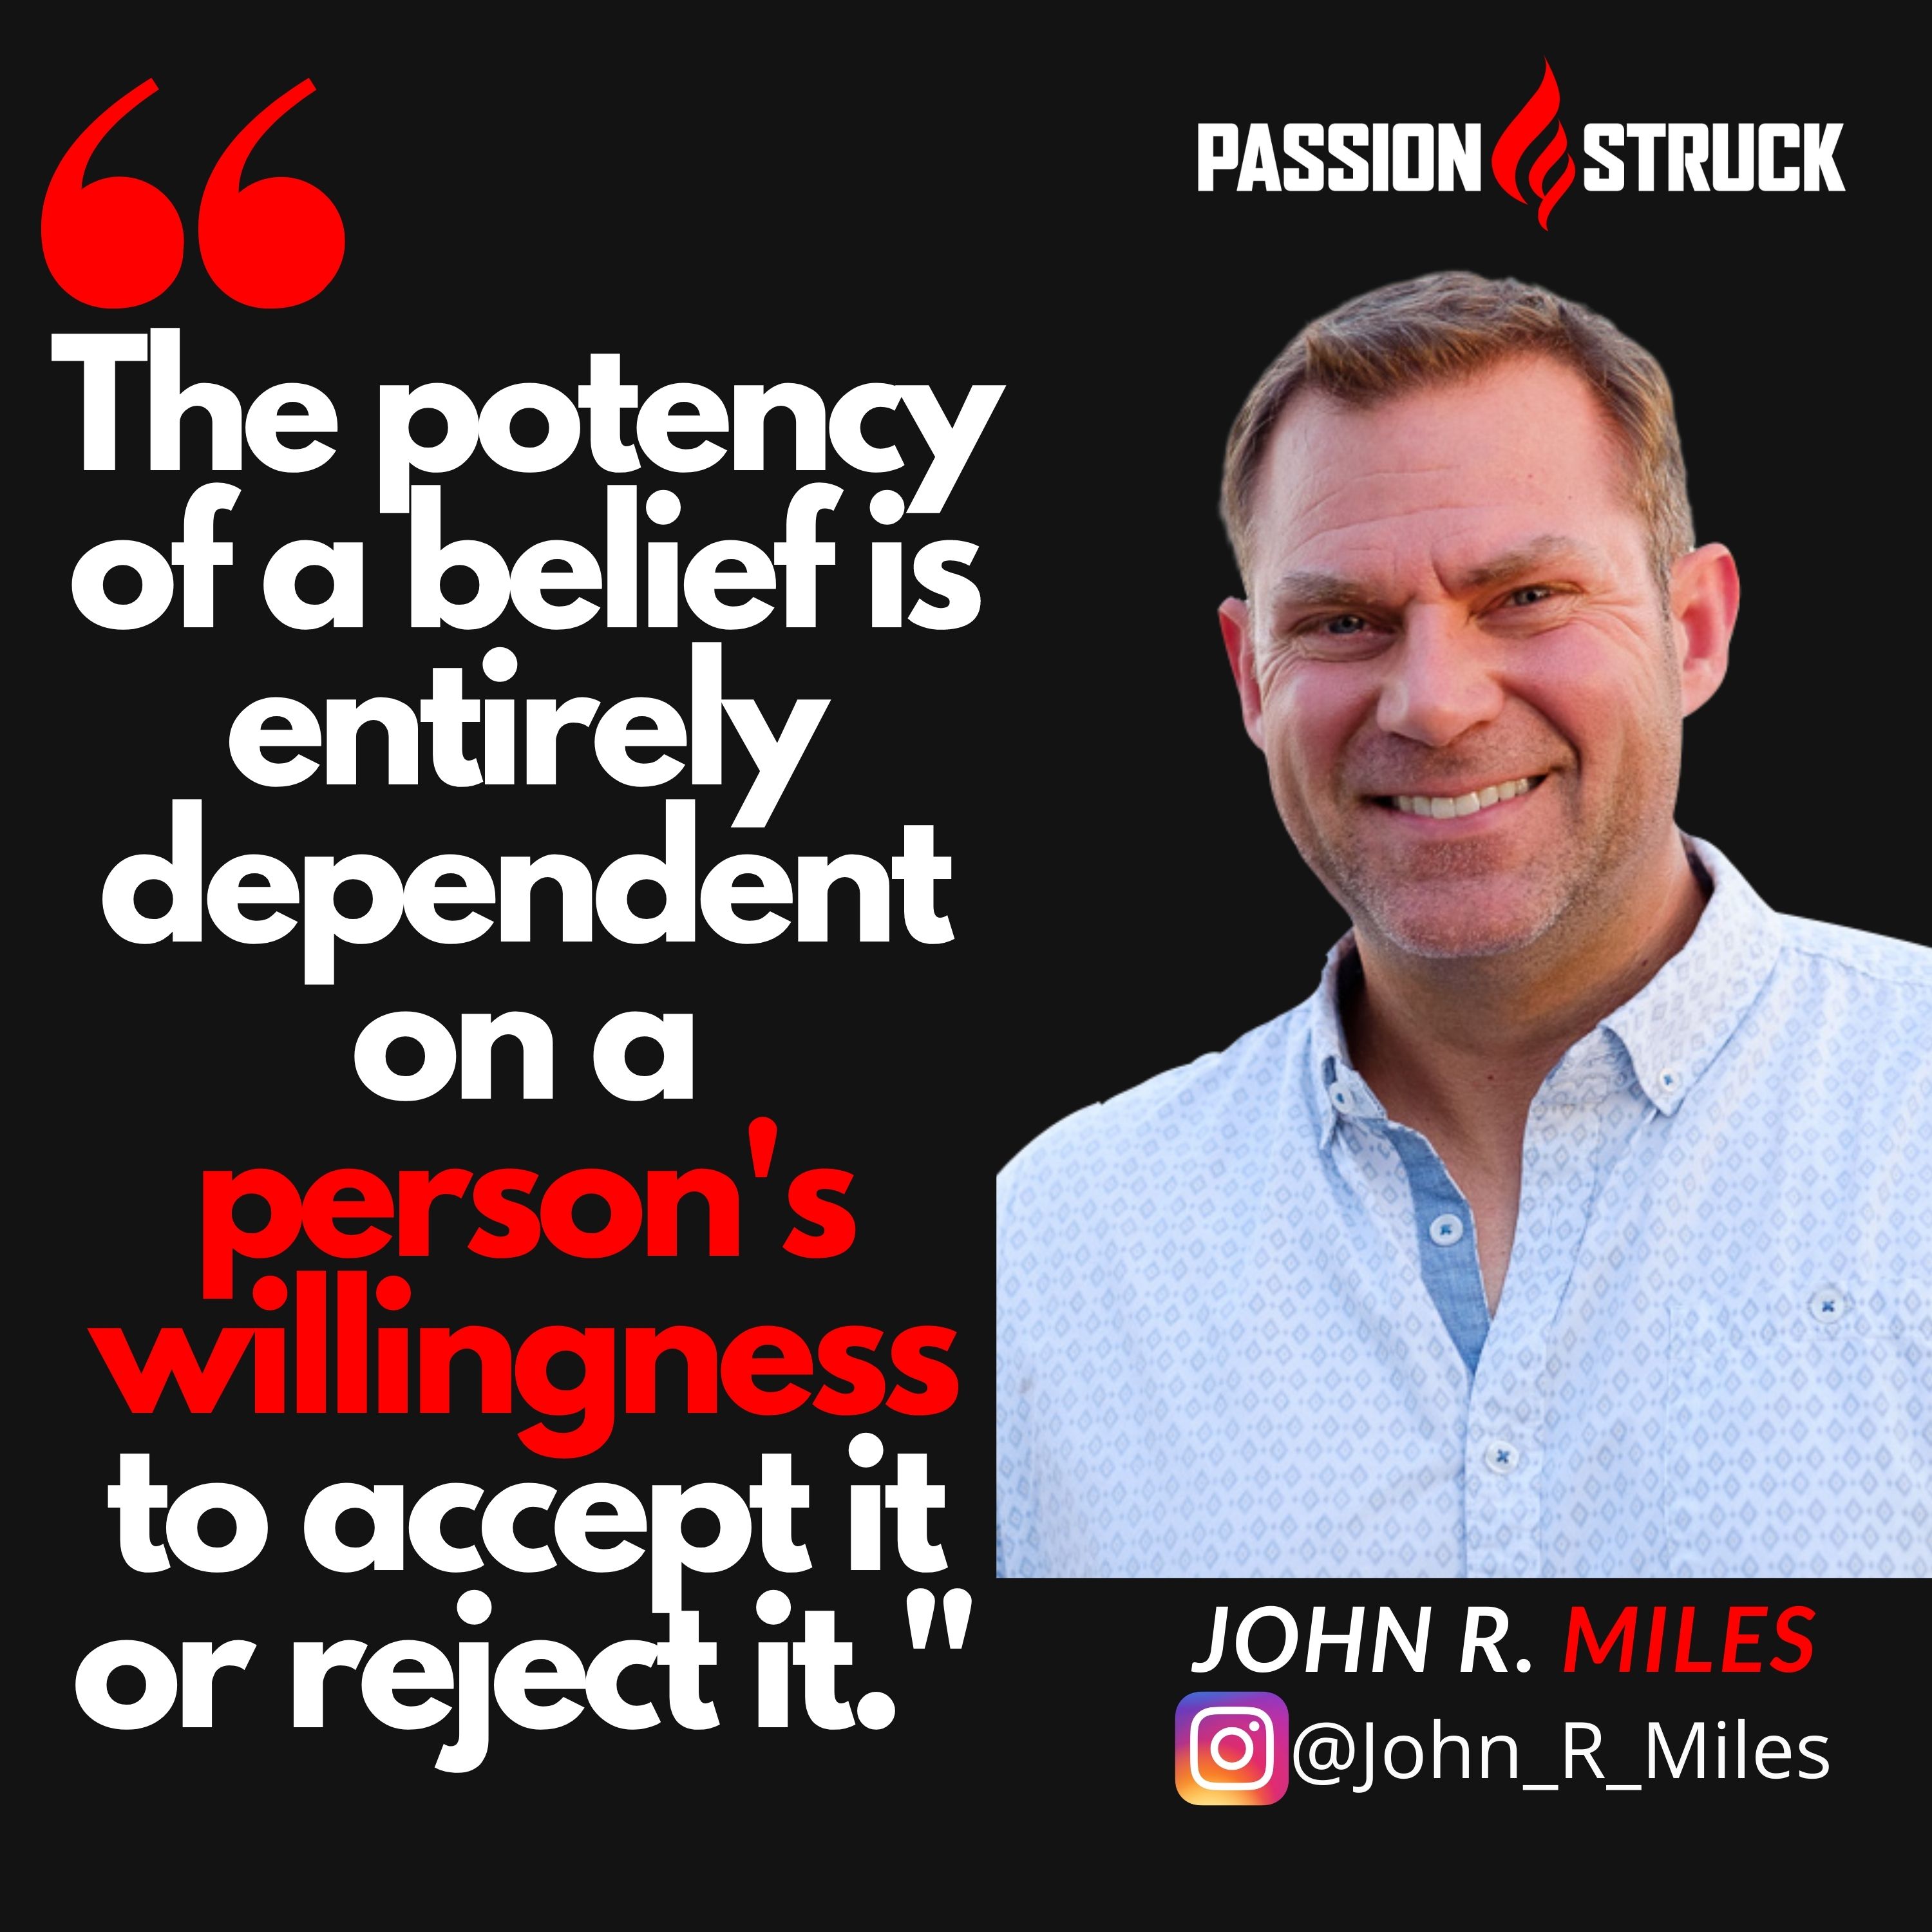 John R. Miles quote on what we believe is based on a persons willingness to accept or reject the belief